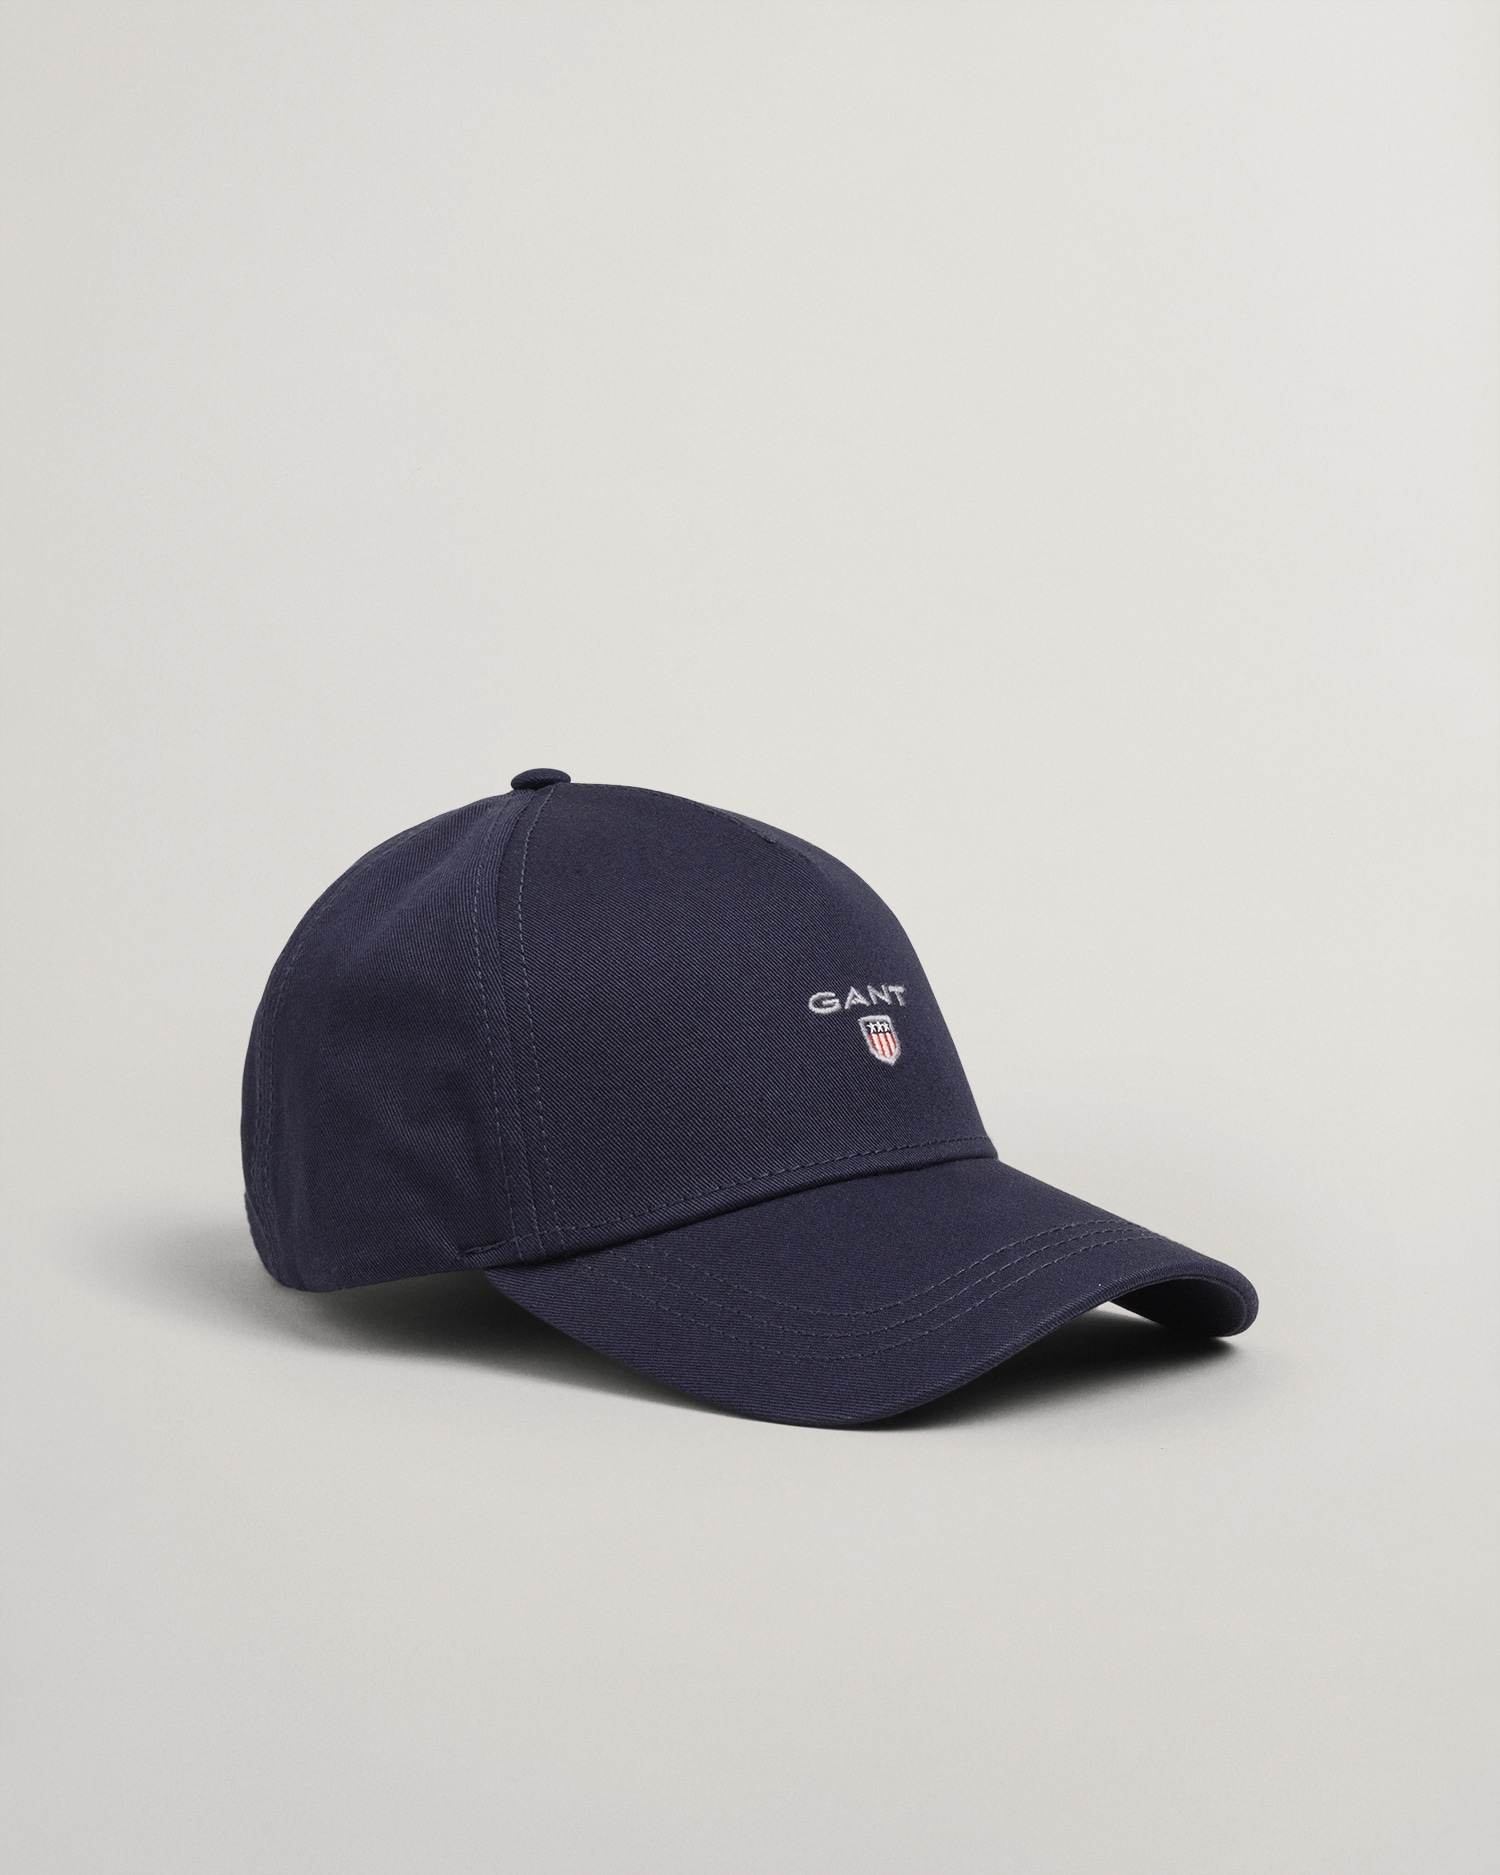 Gant navy boys cap with logo side view